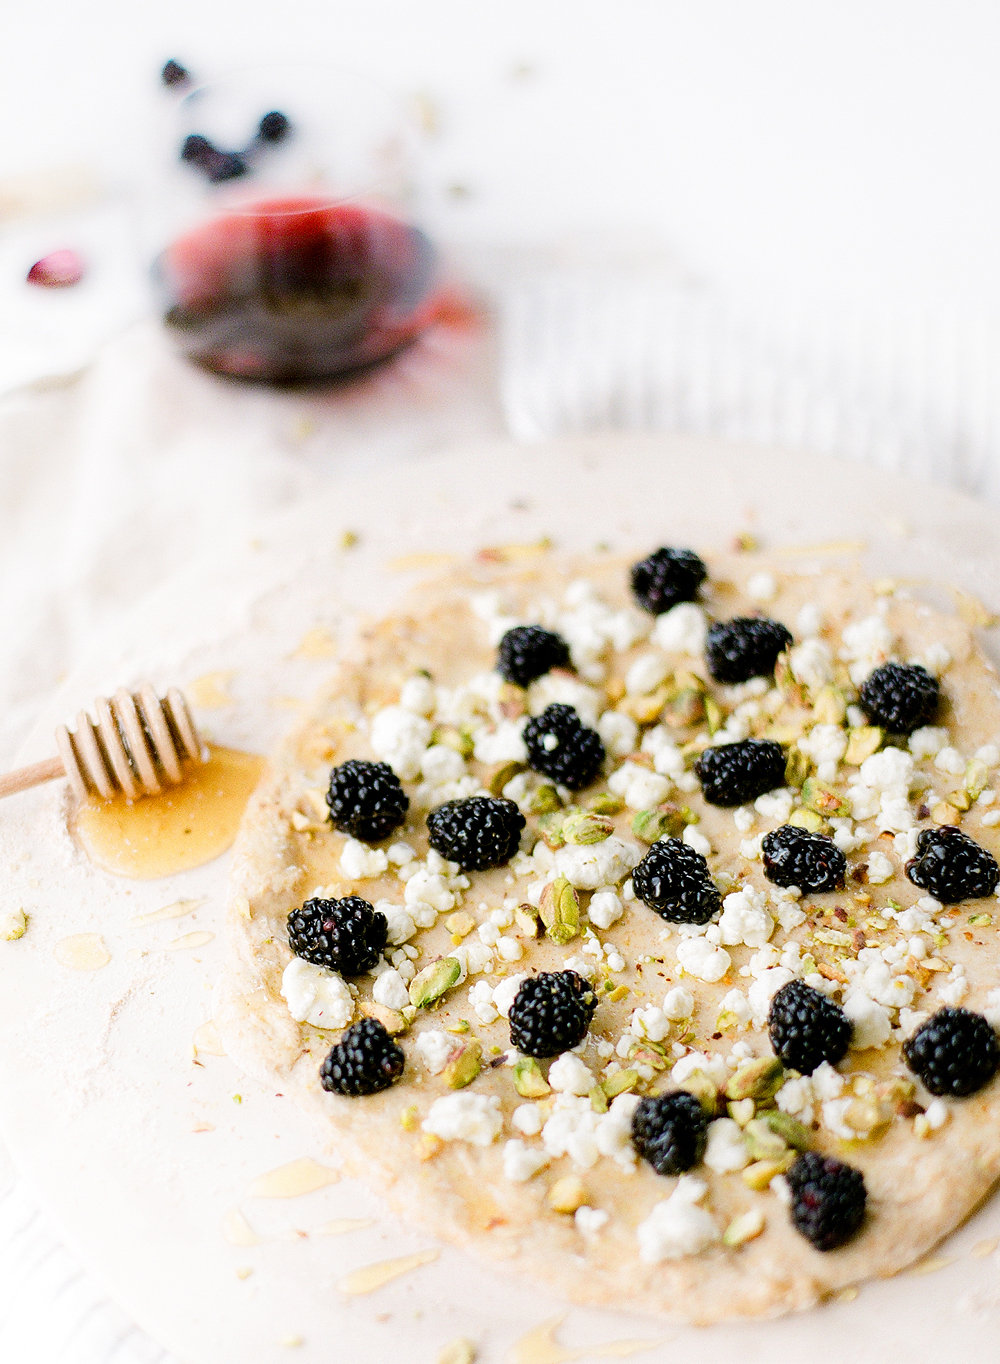 Pistachio is still a relatively new addition in my pizza playbook, so when this blackberry & pistachio flatbread pizza was developed, I was a bit skeptical. But! I am here to say, it is actually quite divine and totally worth a try.